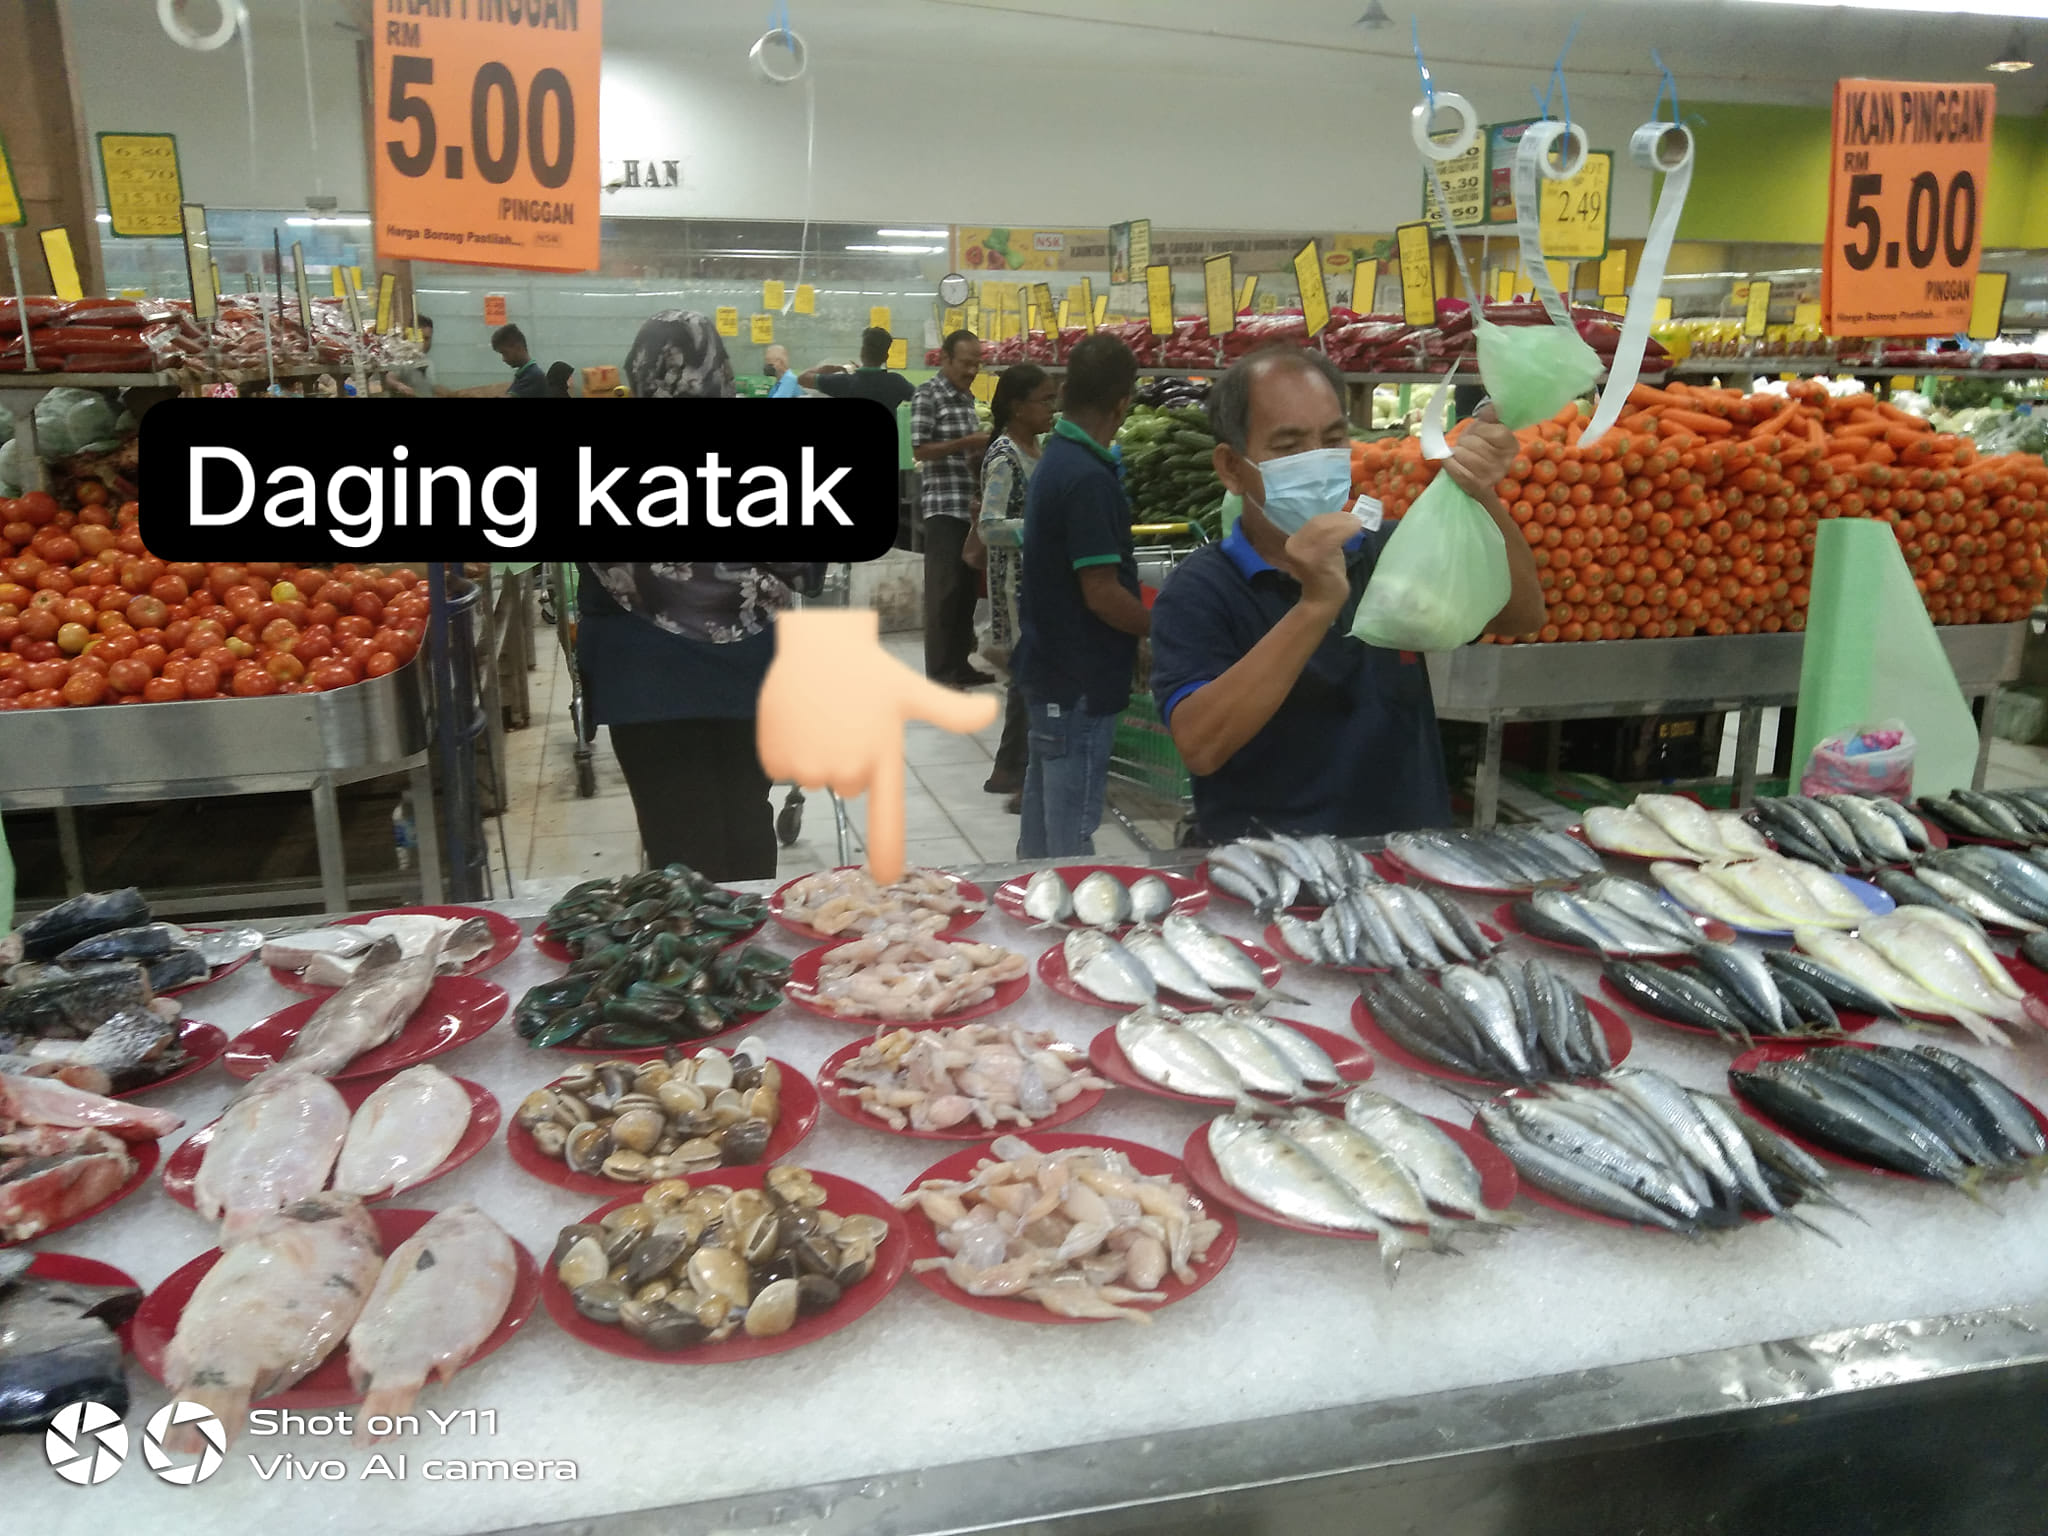 Frog meat was displayed in the fish area at nsk selayang